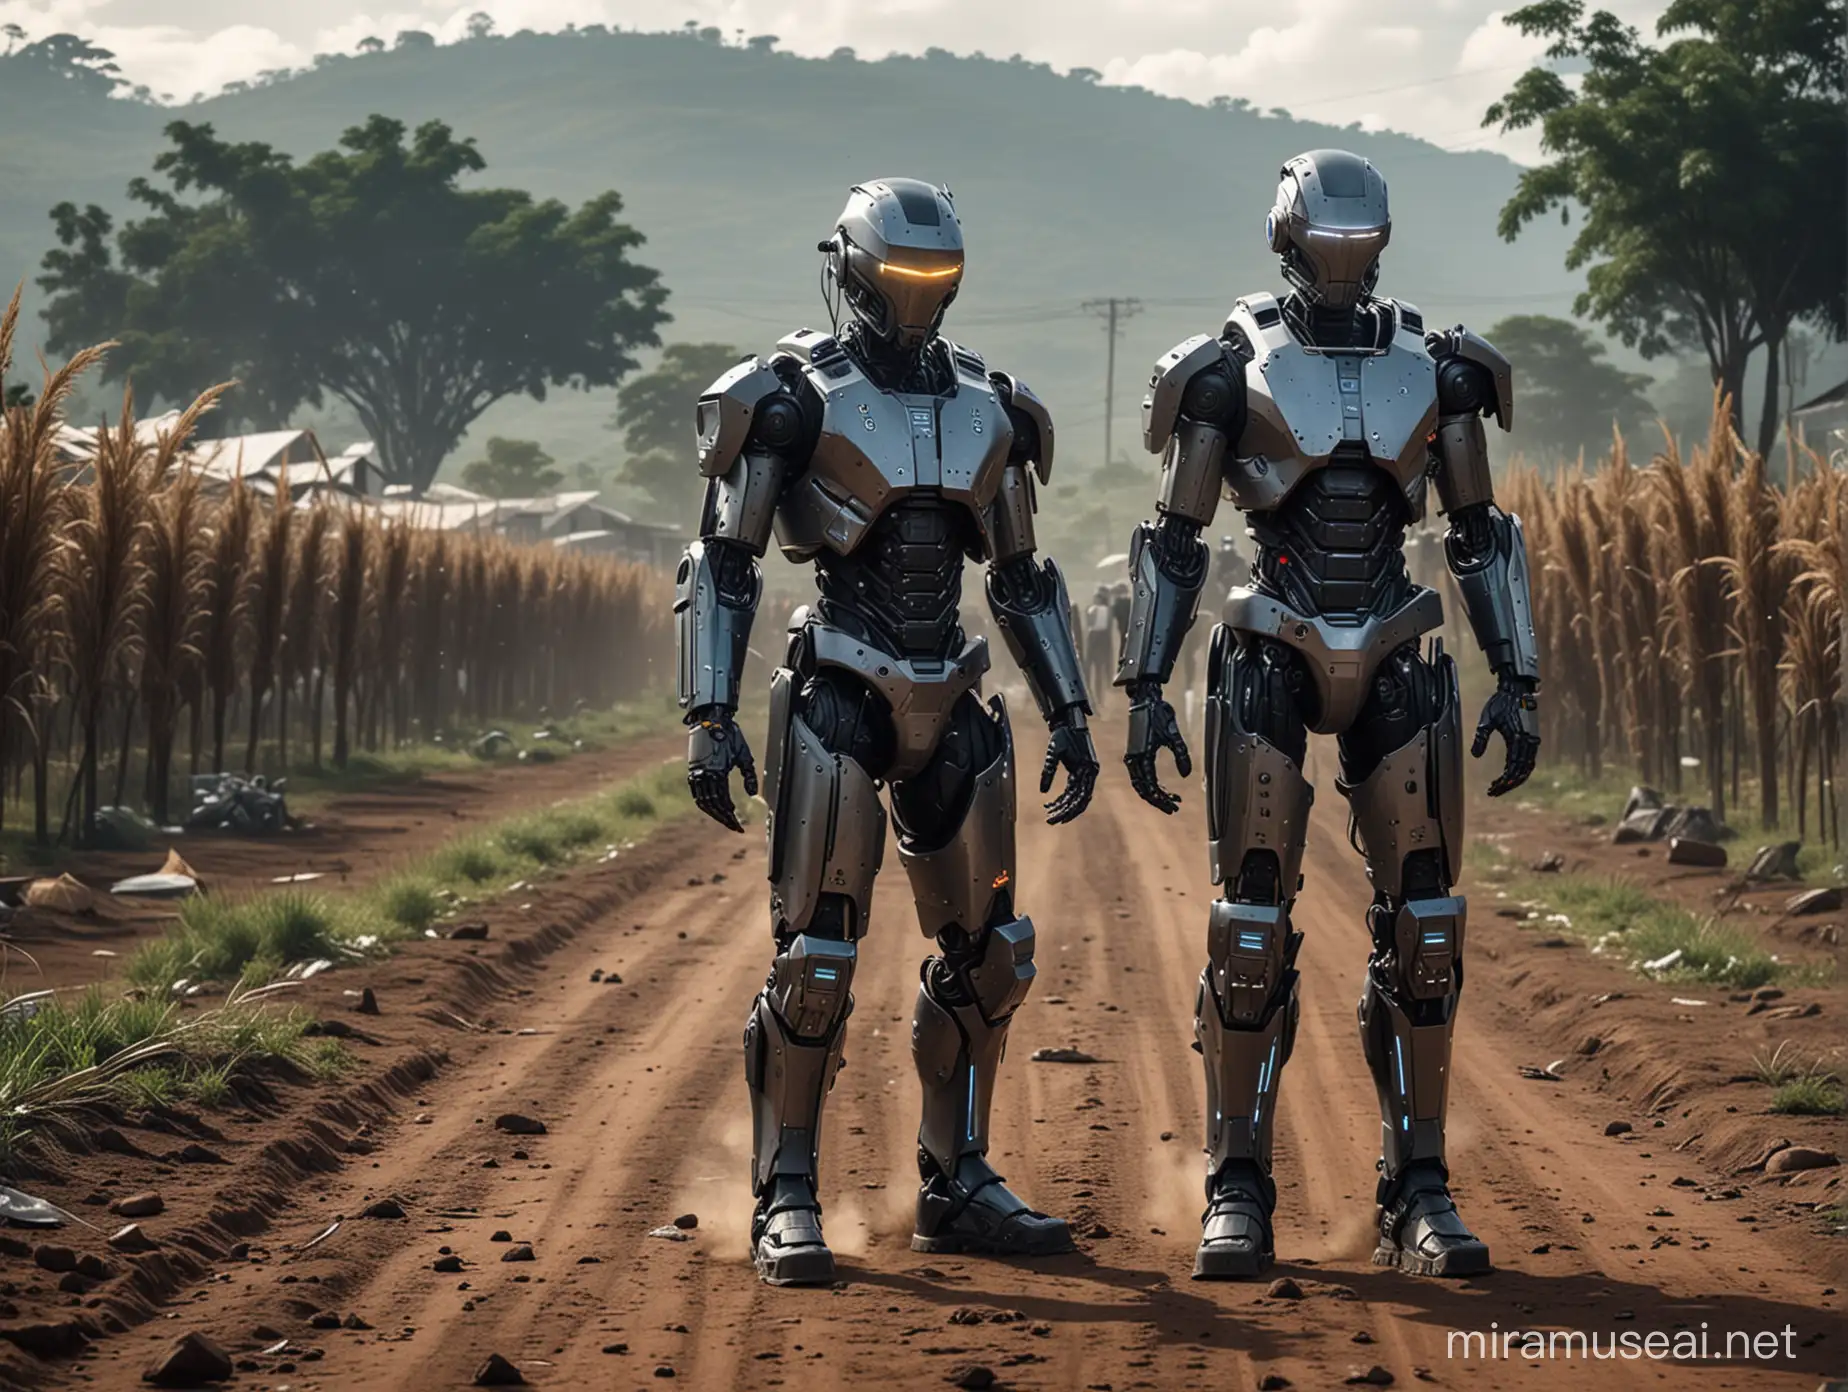 Cyberpunk Riot Robot Police Clash with Human Farmers in South America